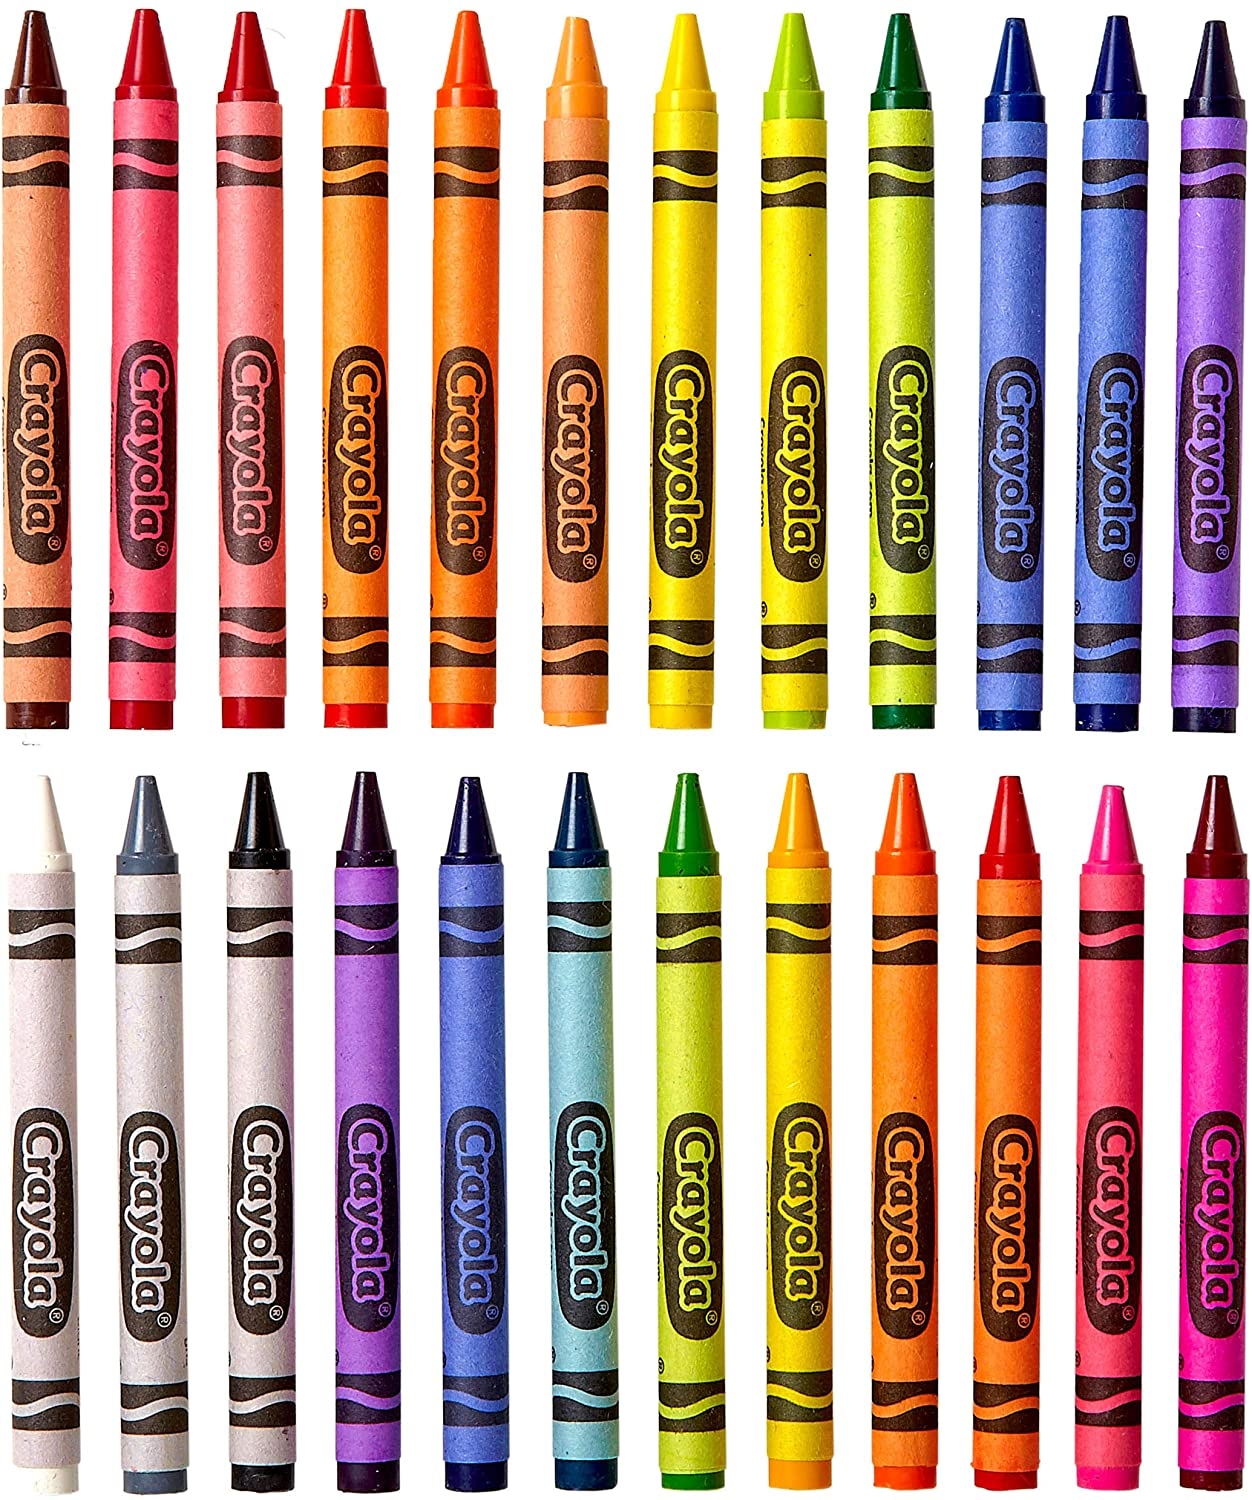 Crayola 24 Count Crayons – Strong Heroes